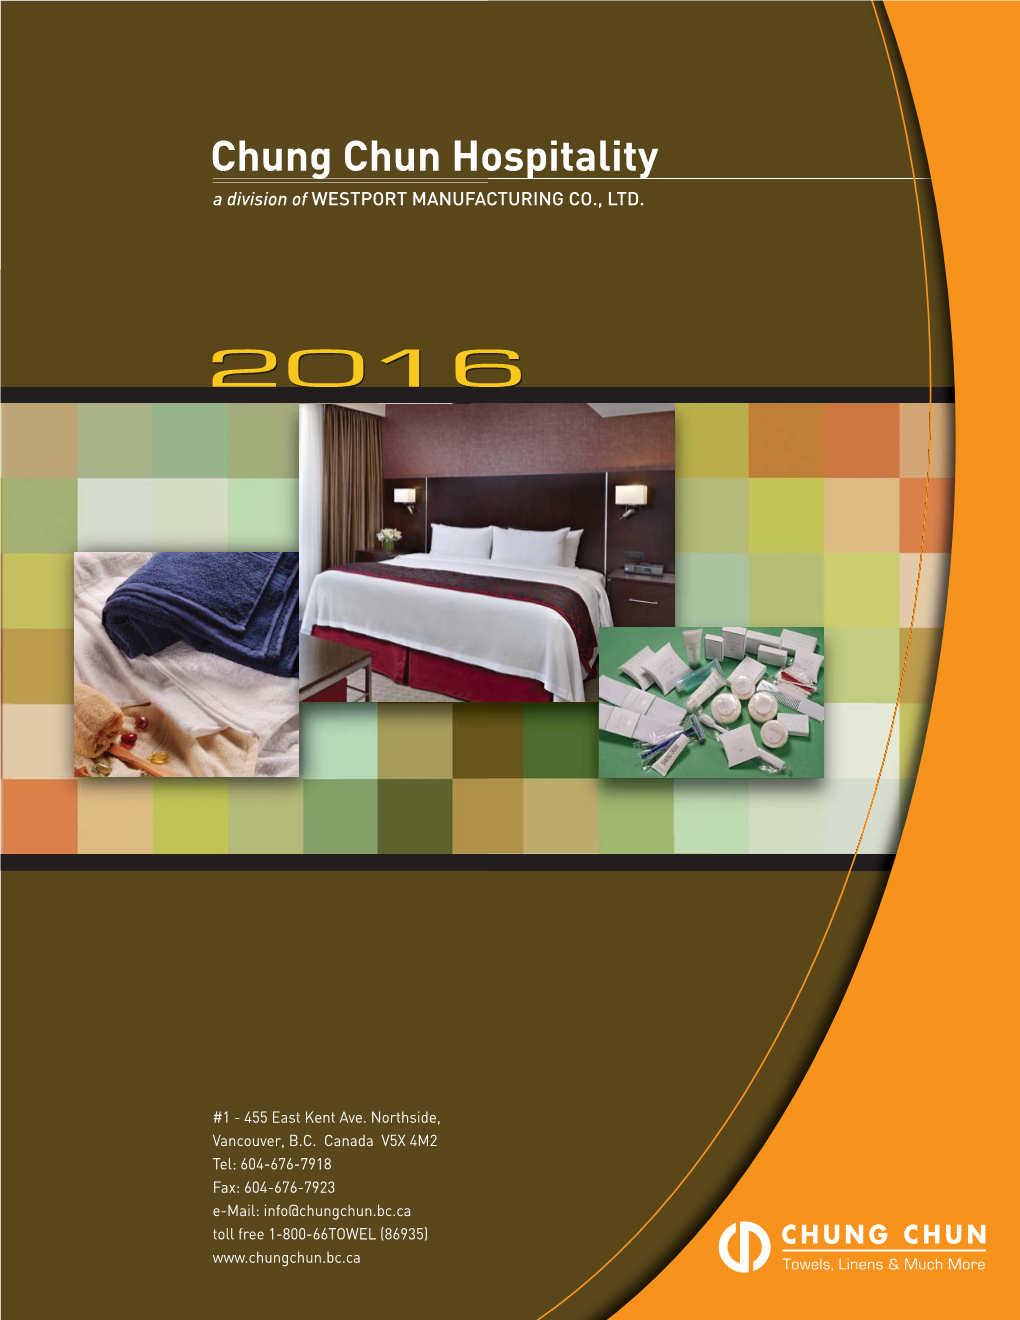 Chung Chun Hospitality a Division of WESTPORT MANUFACTURING CO., LTD